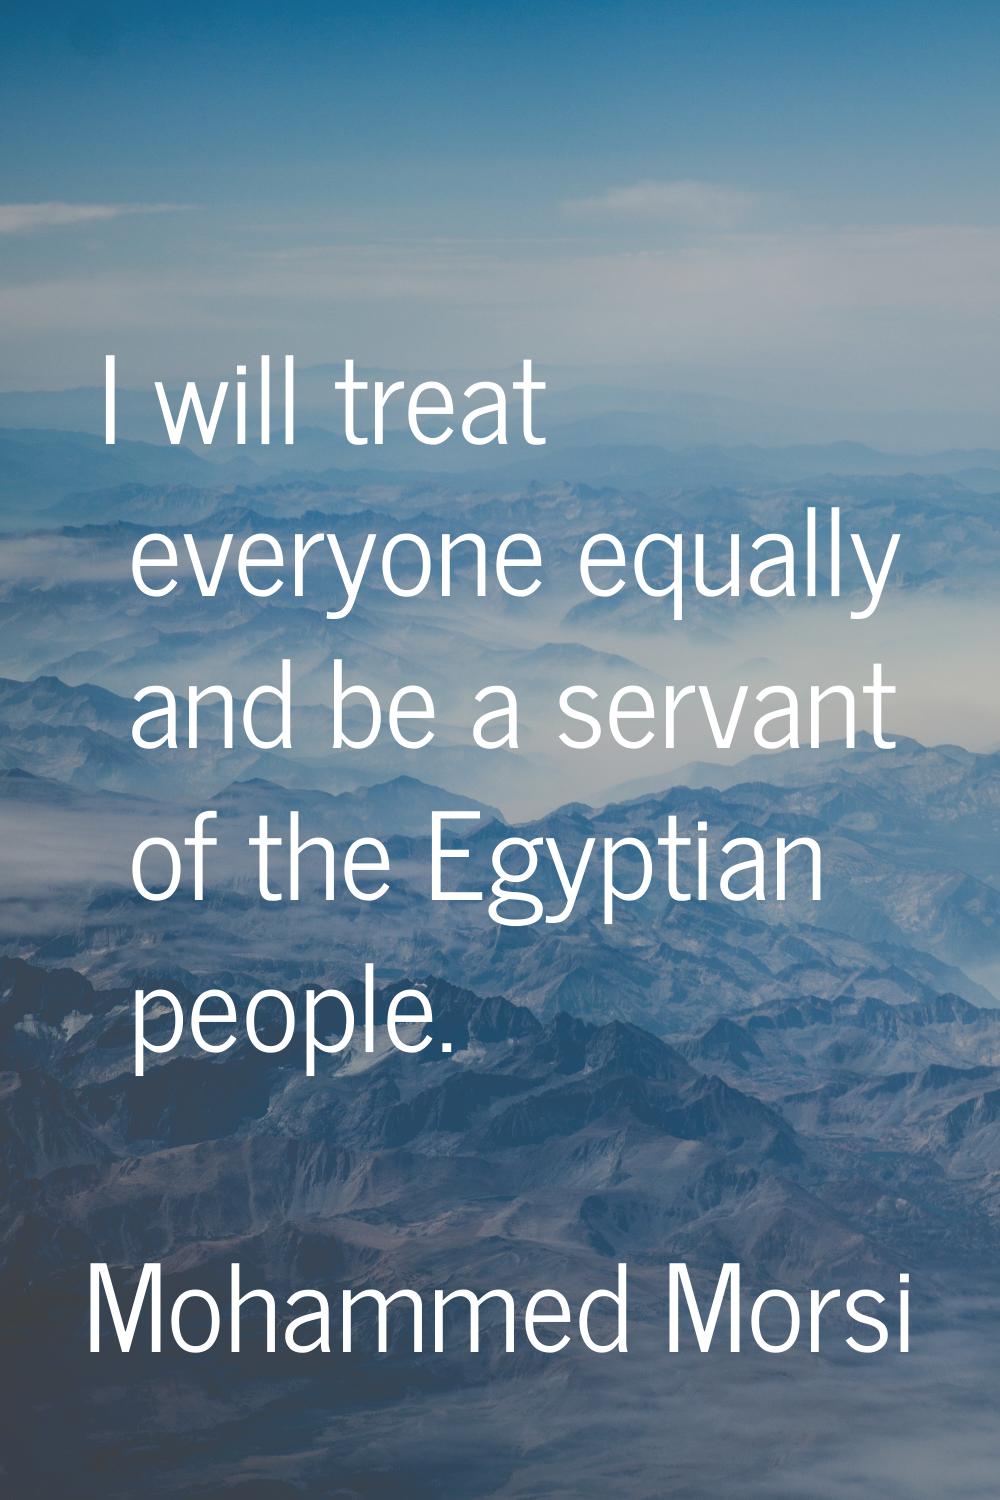 I will treat everyone equally and be a servant of the Egyptian people.